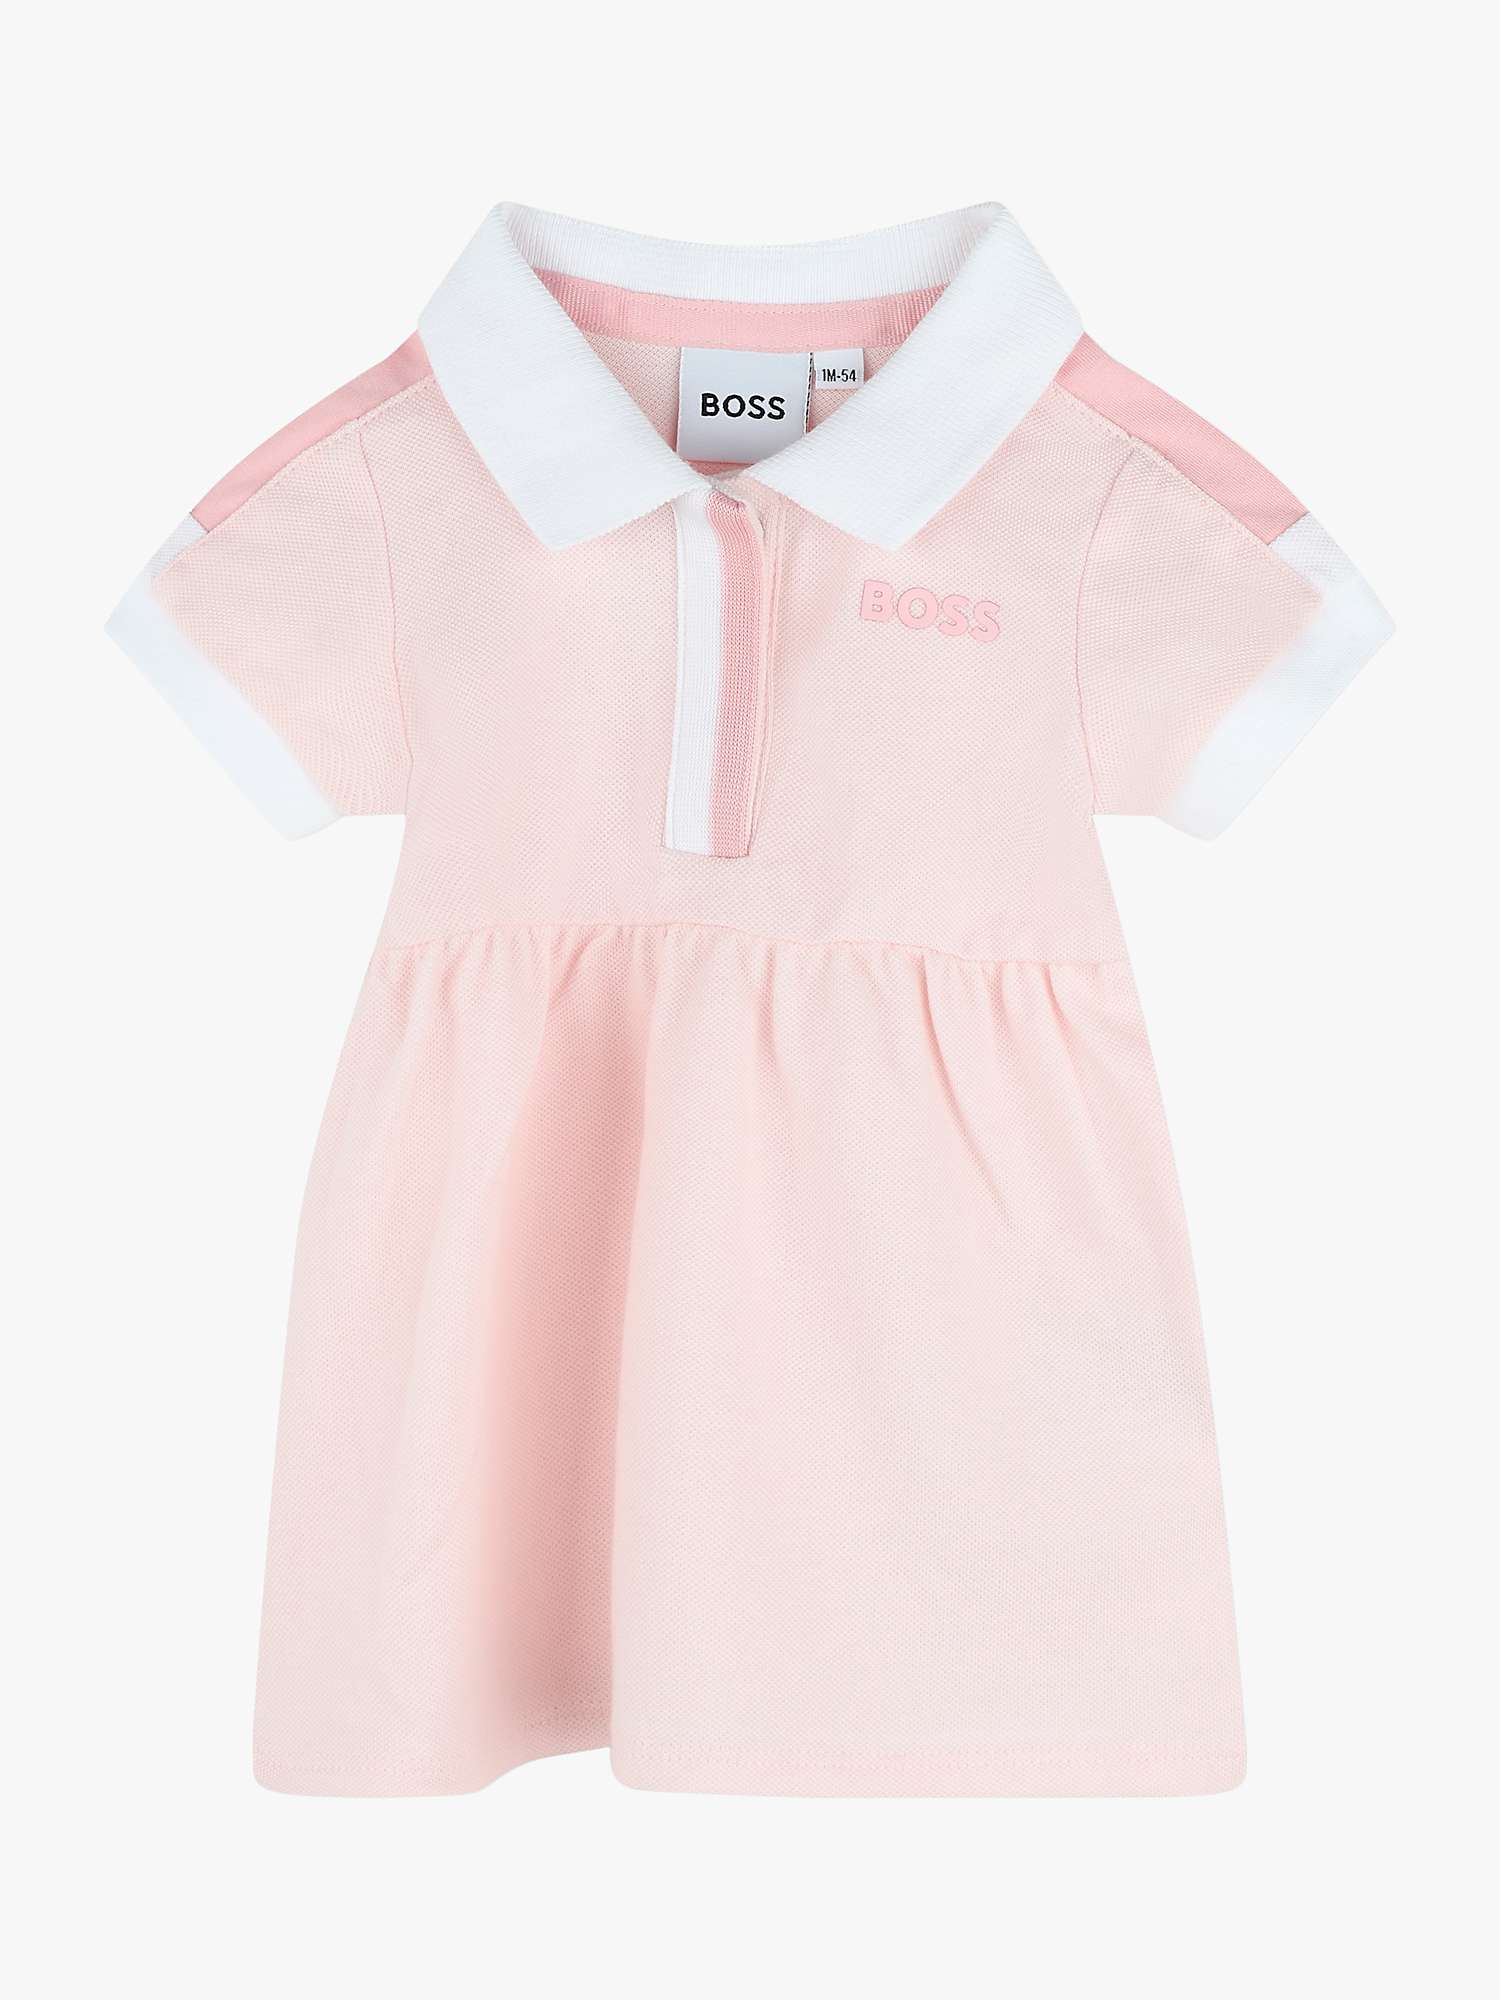 Buy BOSS Baby Polo Dress, Pink Online at johnlewis.com